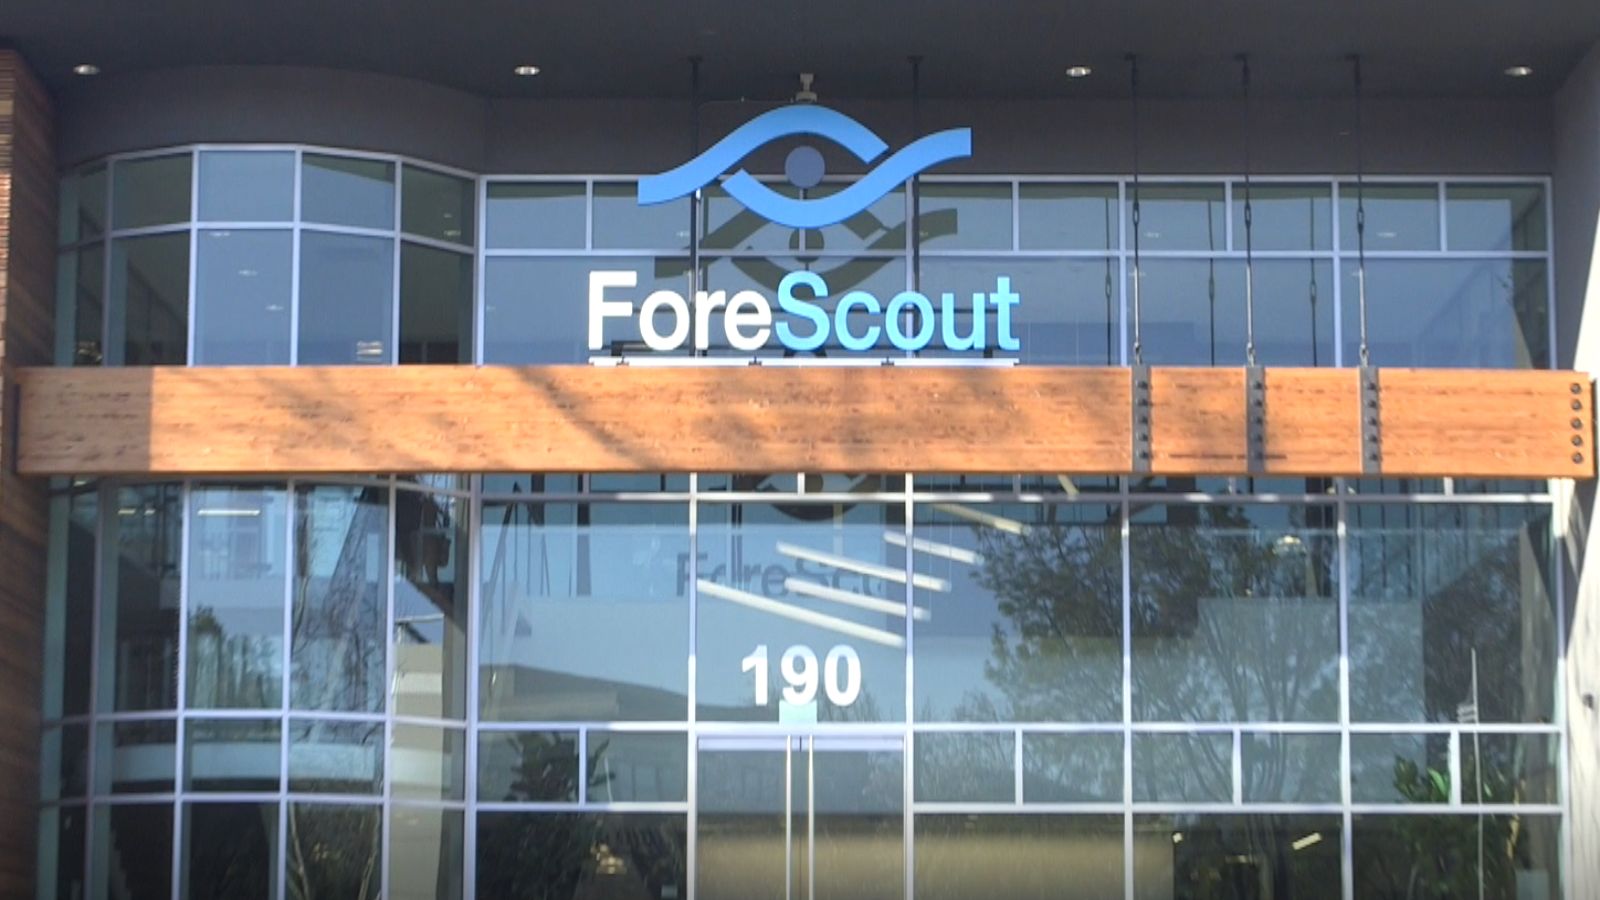 Forescout Technology Deals With Crumbling Acquisitions And Accusations ...